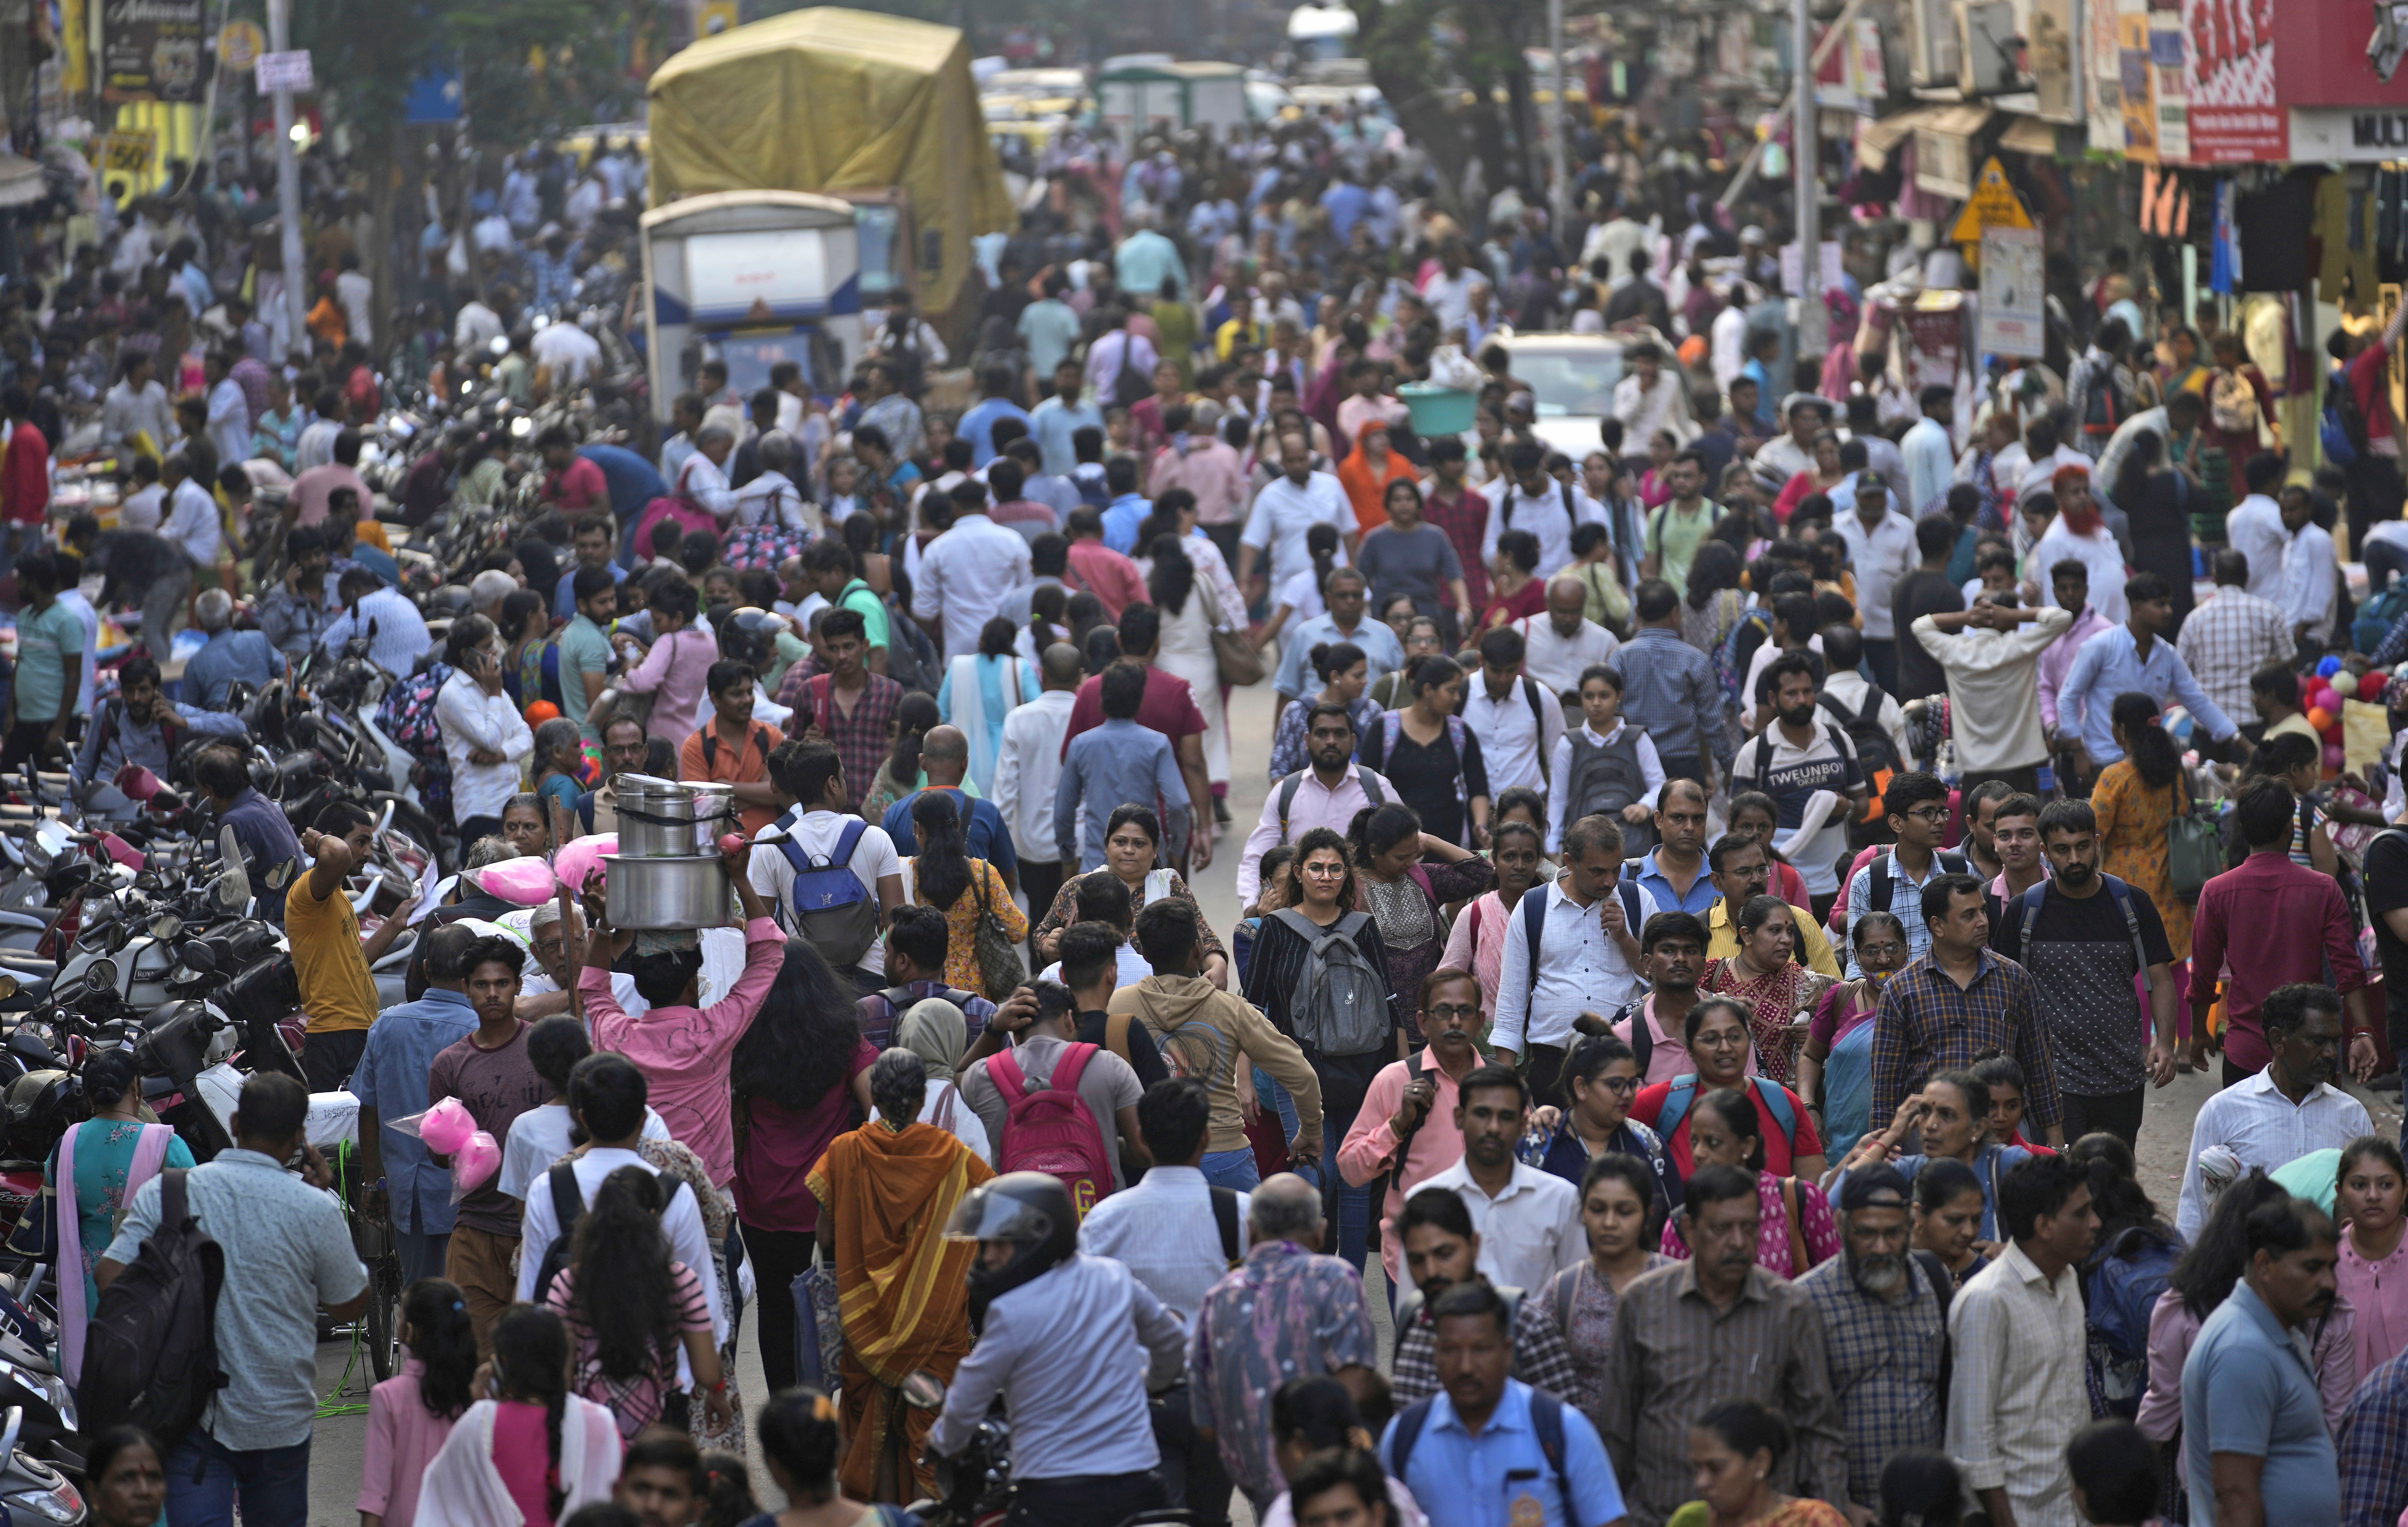 A crowd walks in a market area outside Dadar station in Mumbai, India, Friday, 17 March 2023